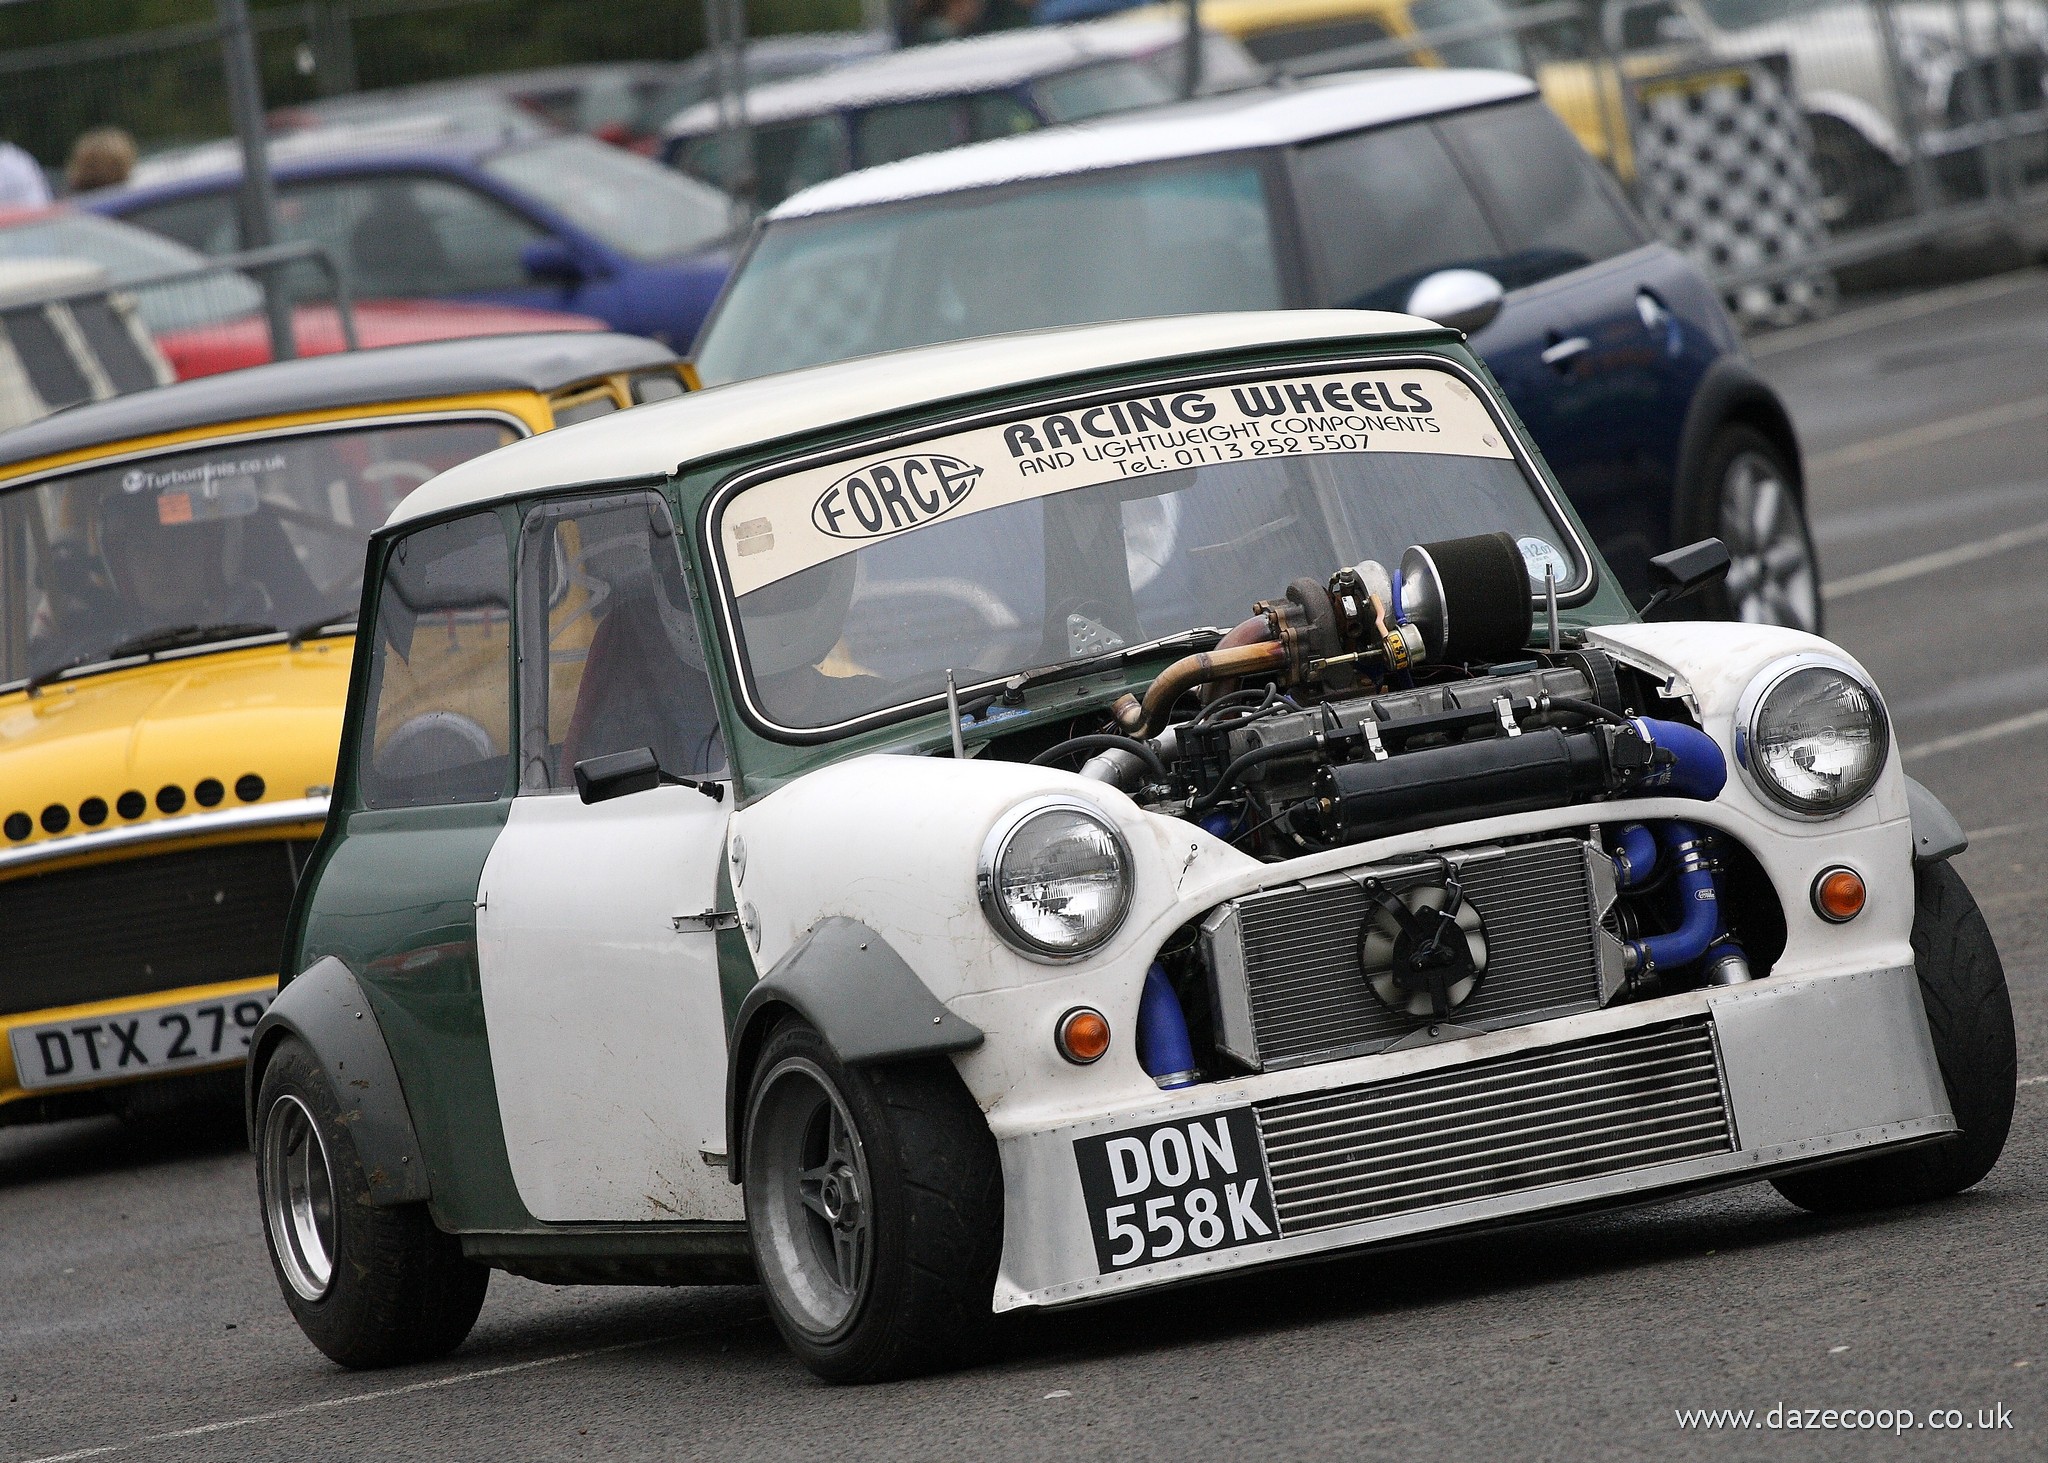 cars, mini cooper, vehicles, tuning, modified, front angle view - desktop wallpaper